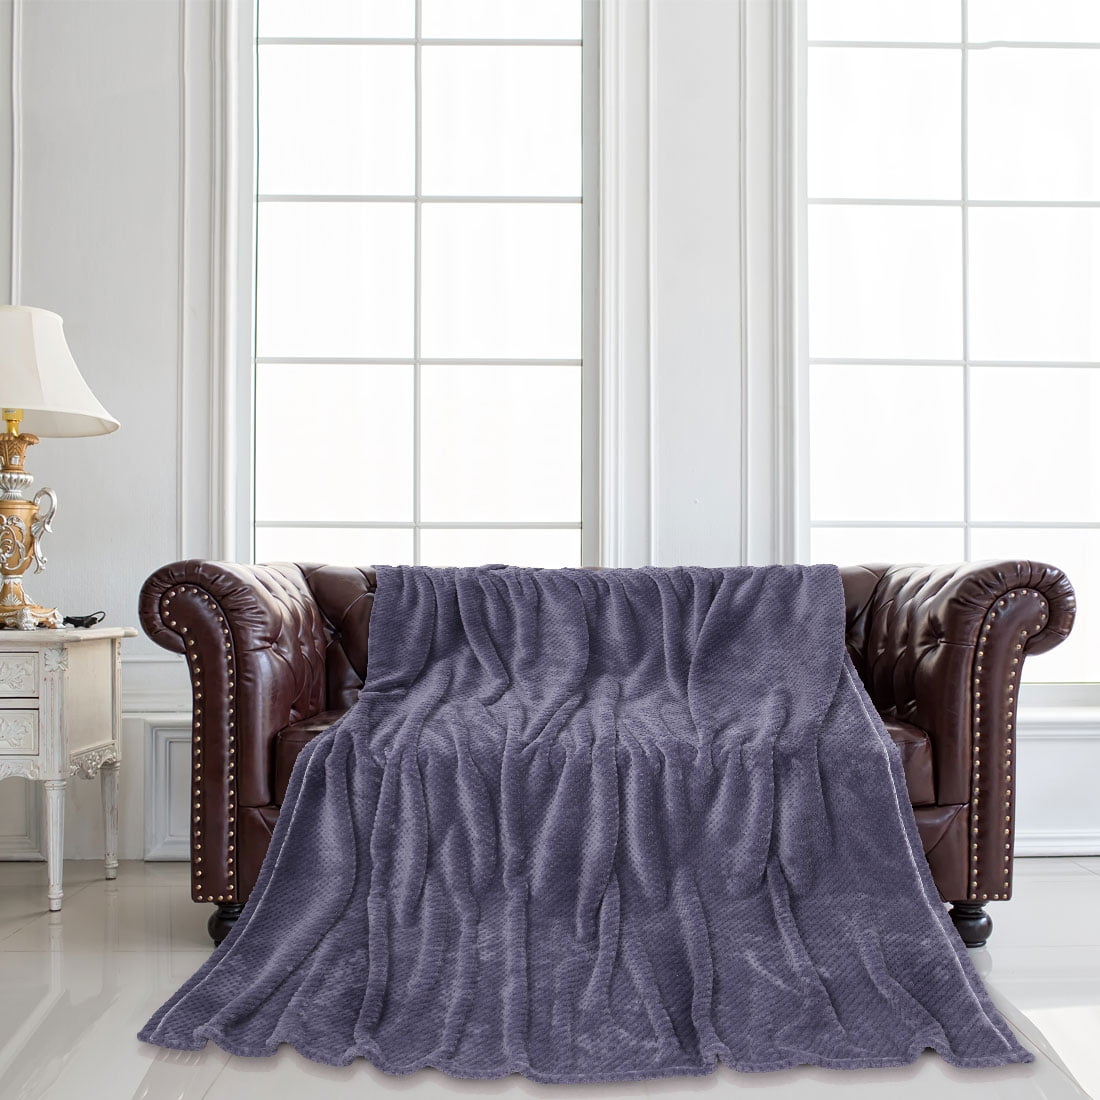 Luxurious Fuzzy Lightweight All Season Bed or Couch Blanket Premium Bed Blanket 50 x 60 Inches senya Ultra Soft Microplush Octopus and Surfing Board Throw Blanket